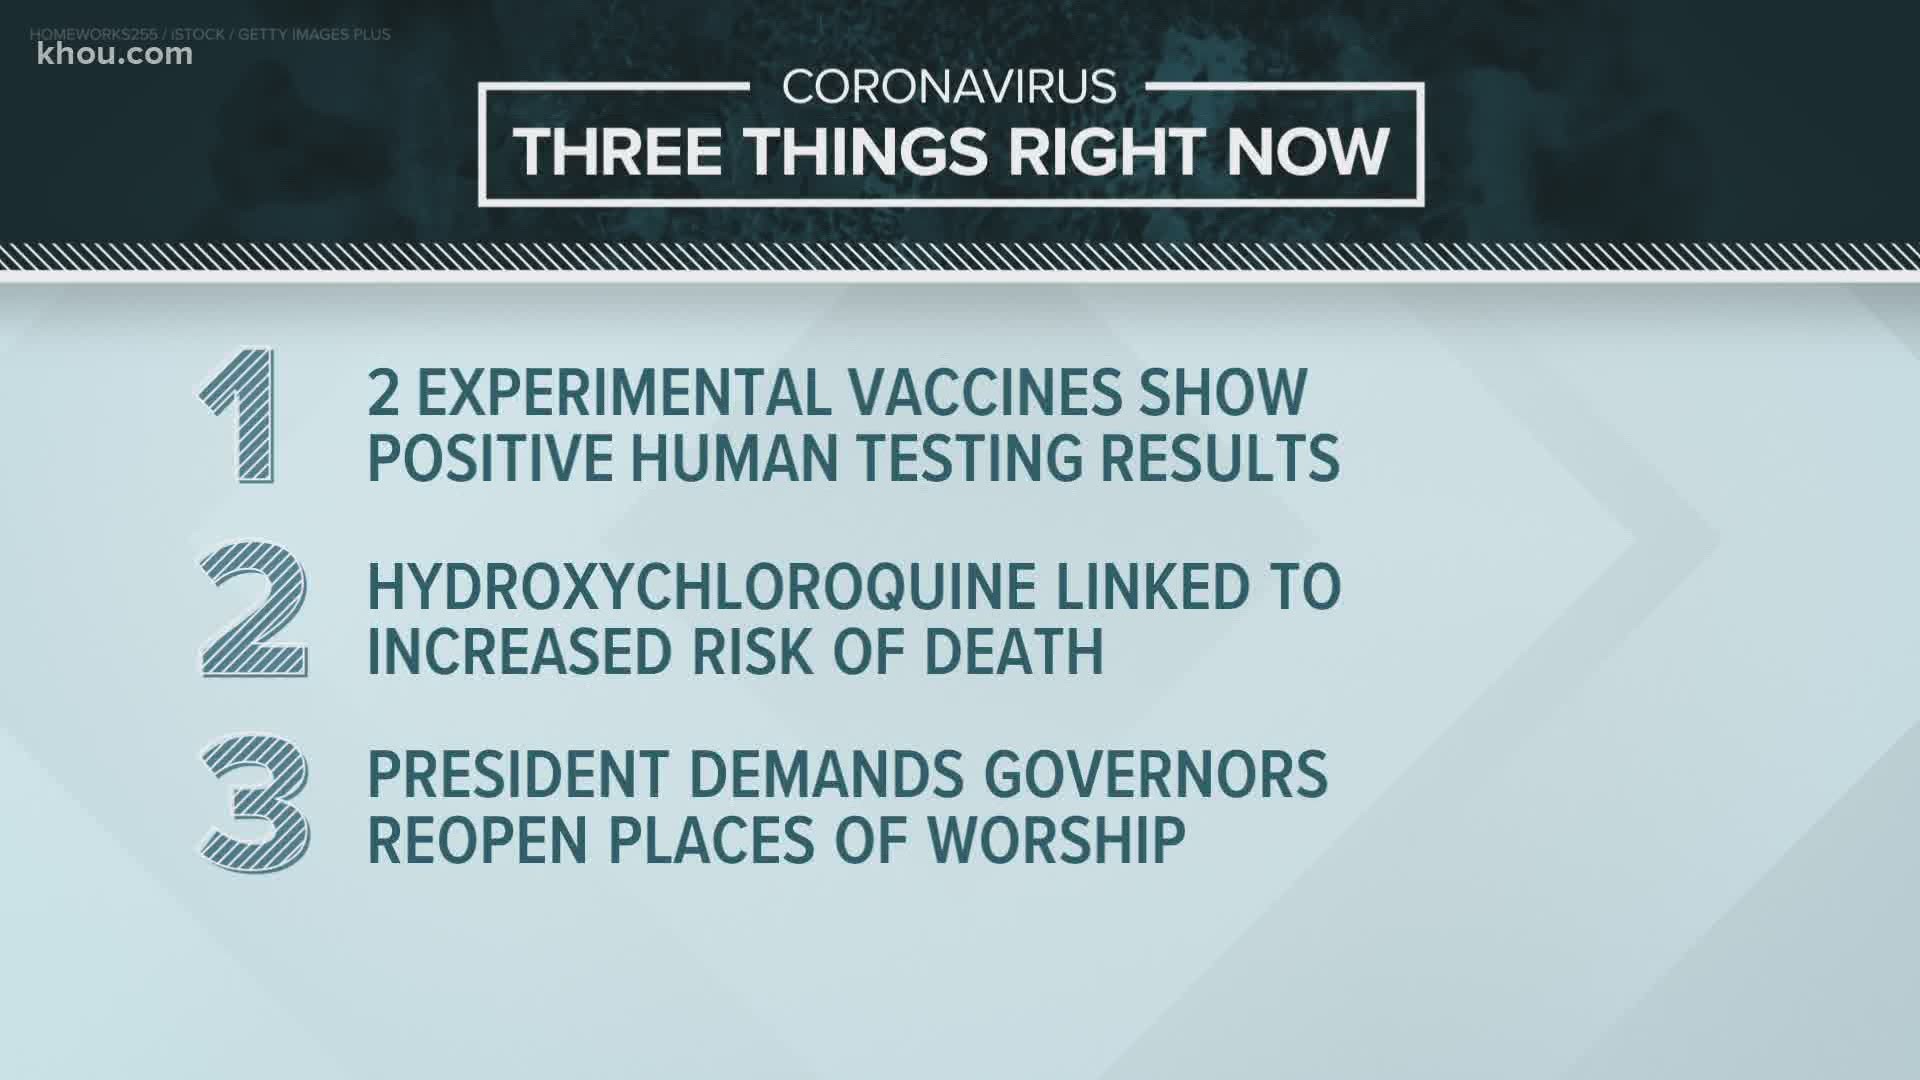 Here are your local and national coronavirus headlines for May 23, 2020 including the latest on bars reopening in Houston.